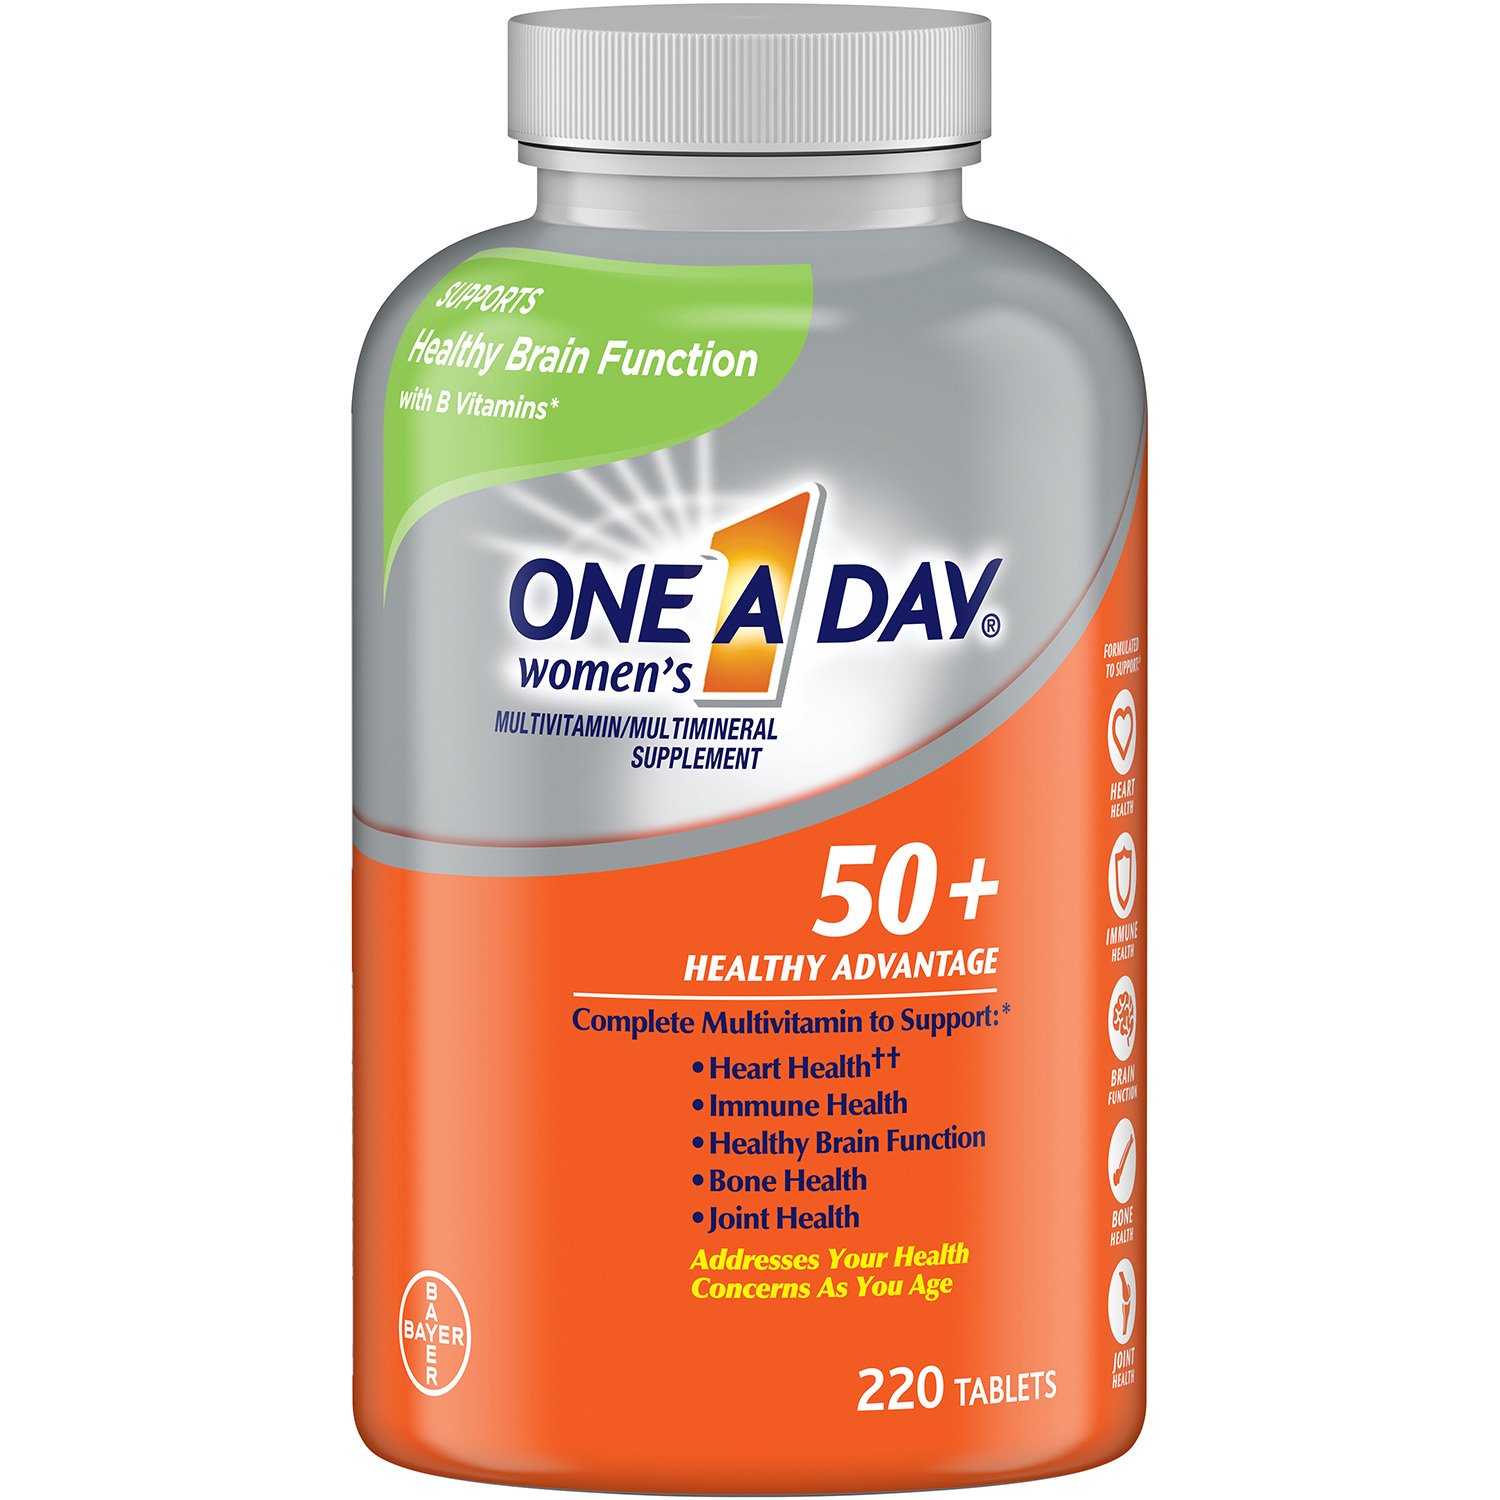 One A Day Women's 50+ Multivitamin (300 Tablets)